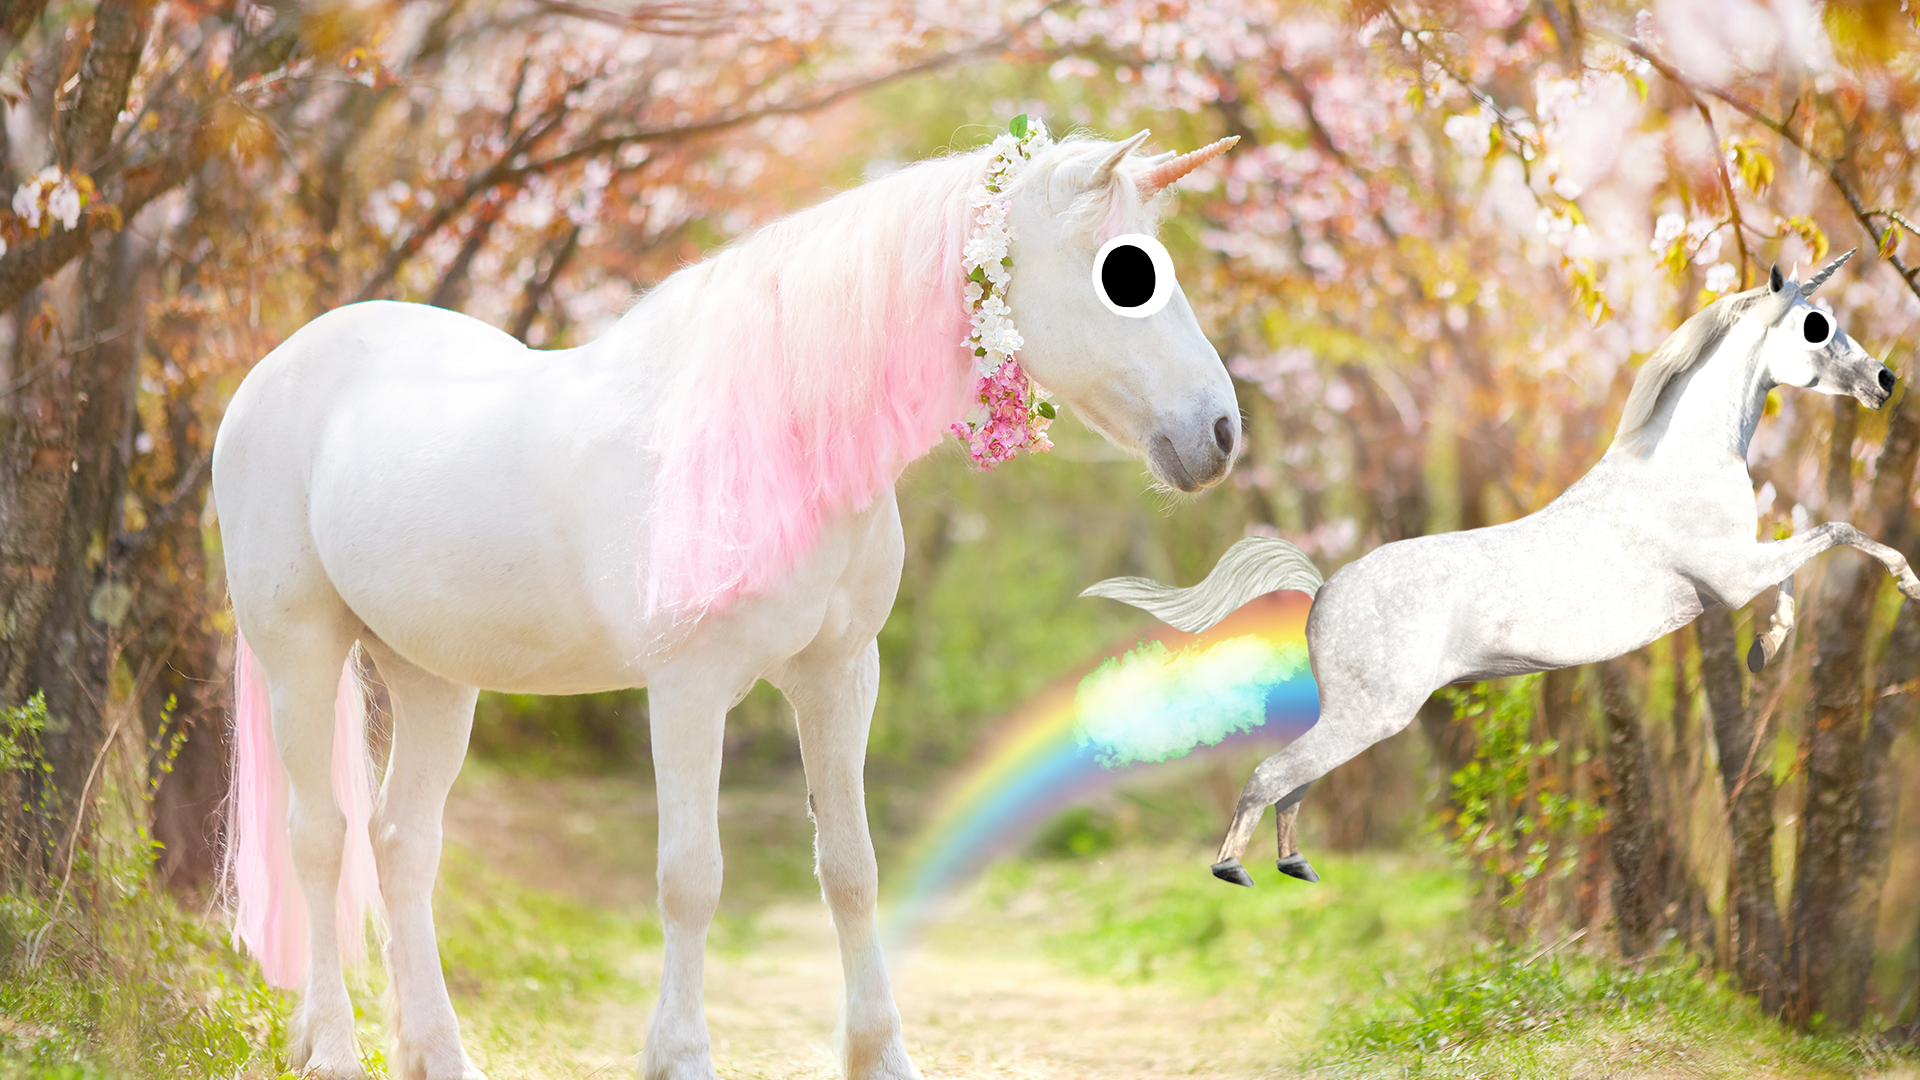 Unicorn in forest with flying unicorn farting rainbows 